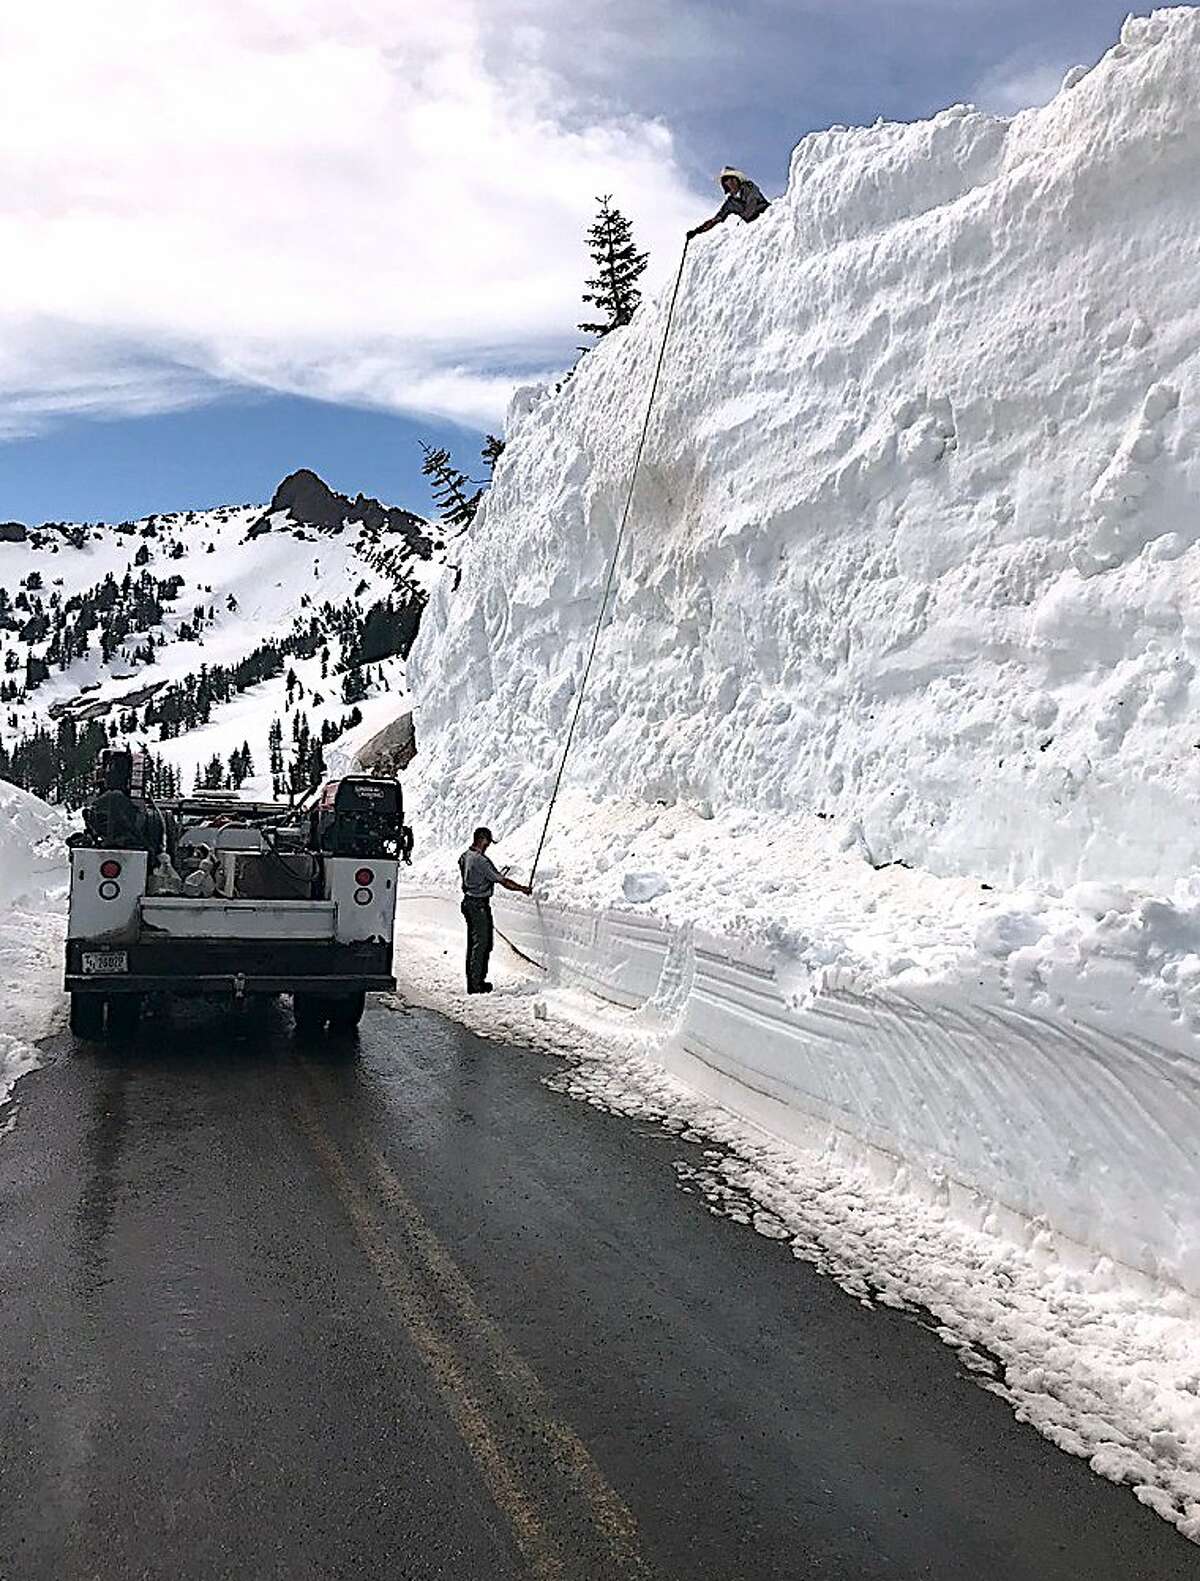 Road crews measured the snow wall at 28 feet high on the Lassen Park Highway at Lassen Volcanic National Park